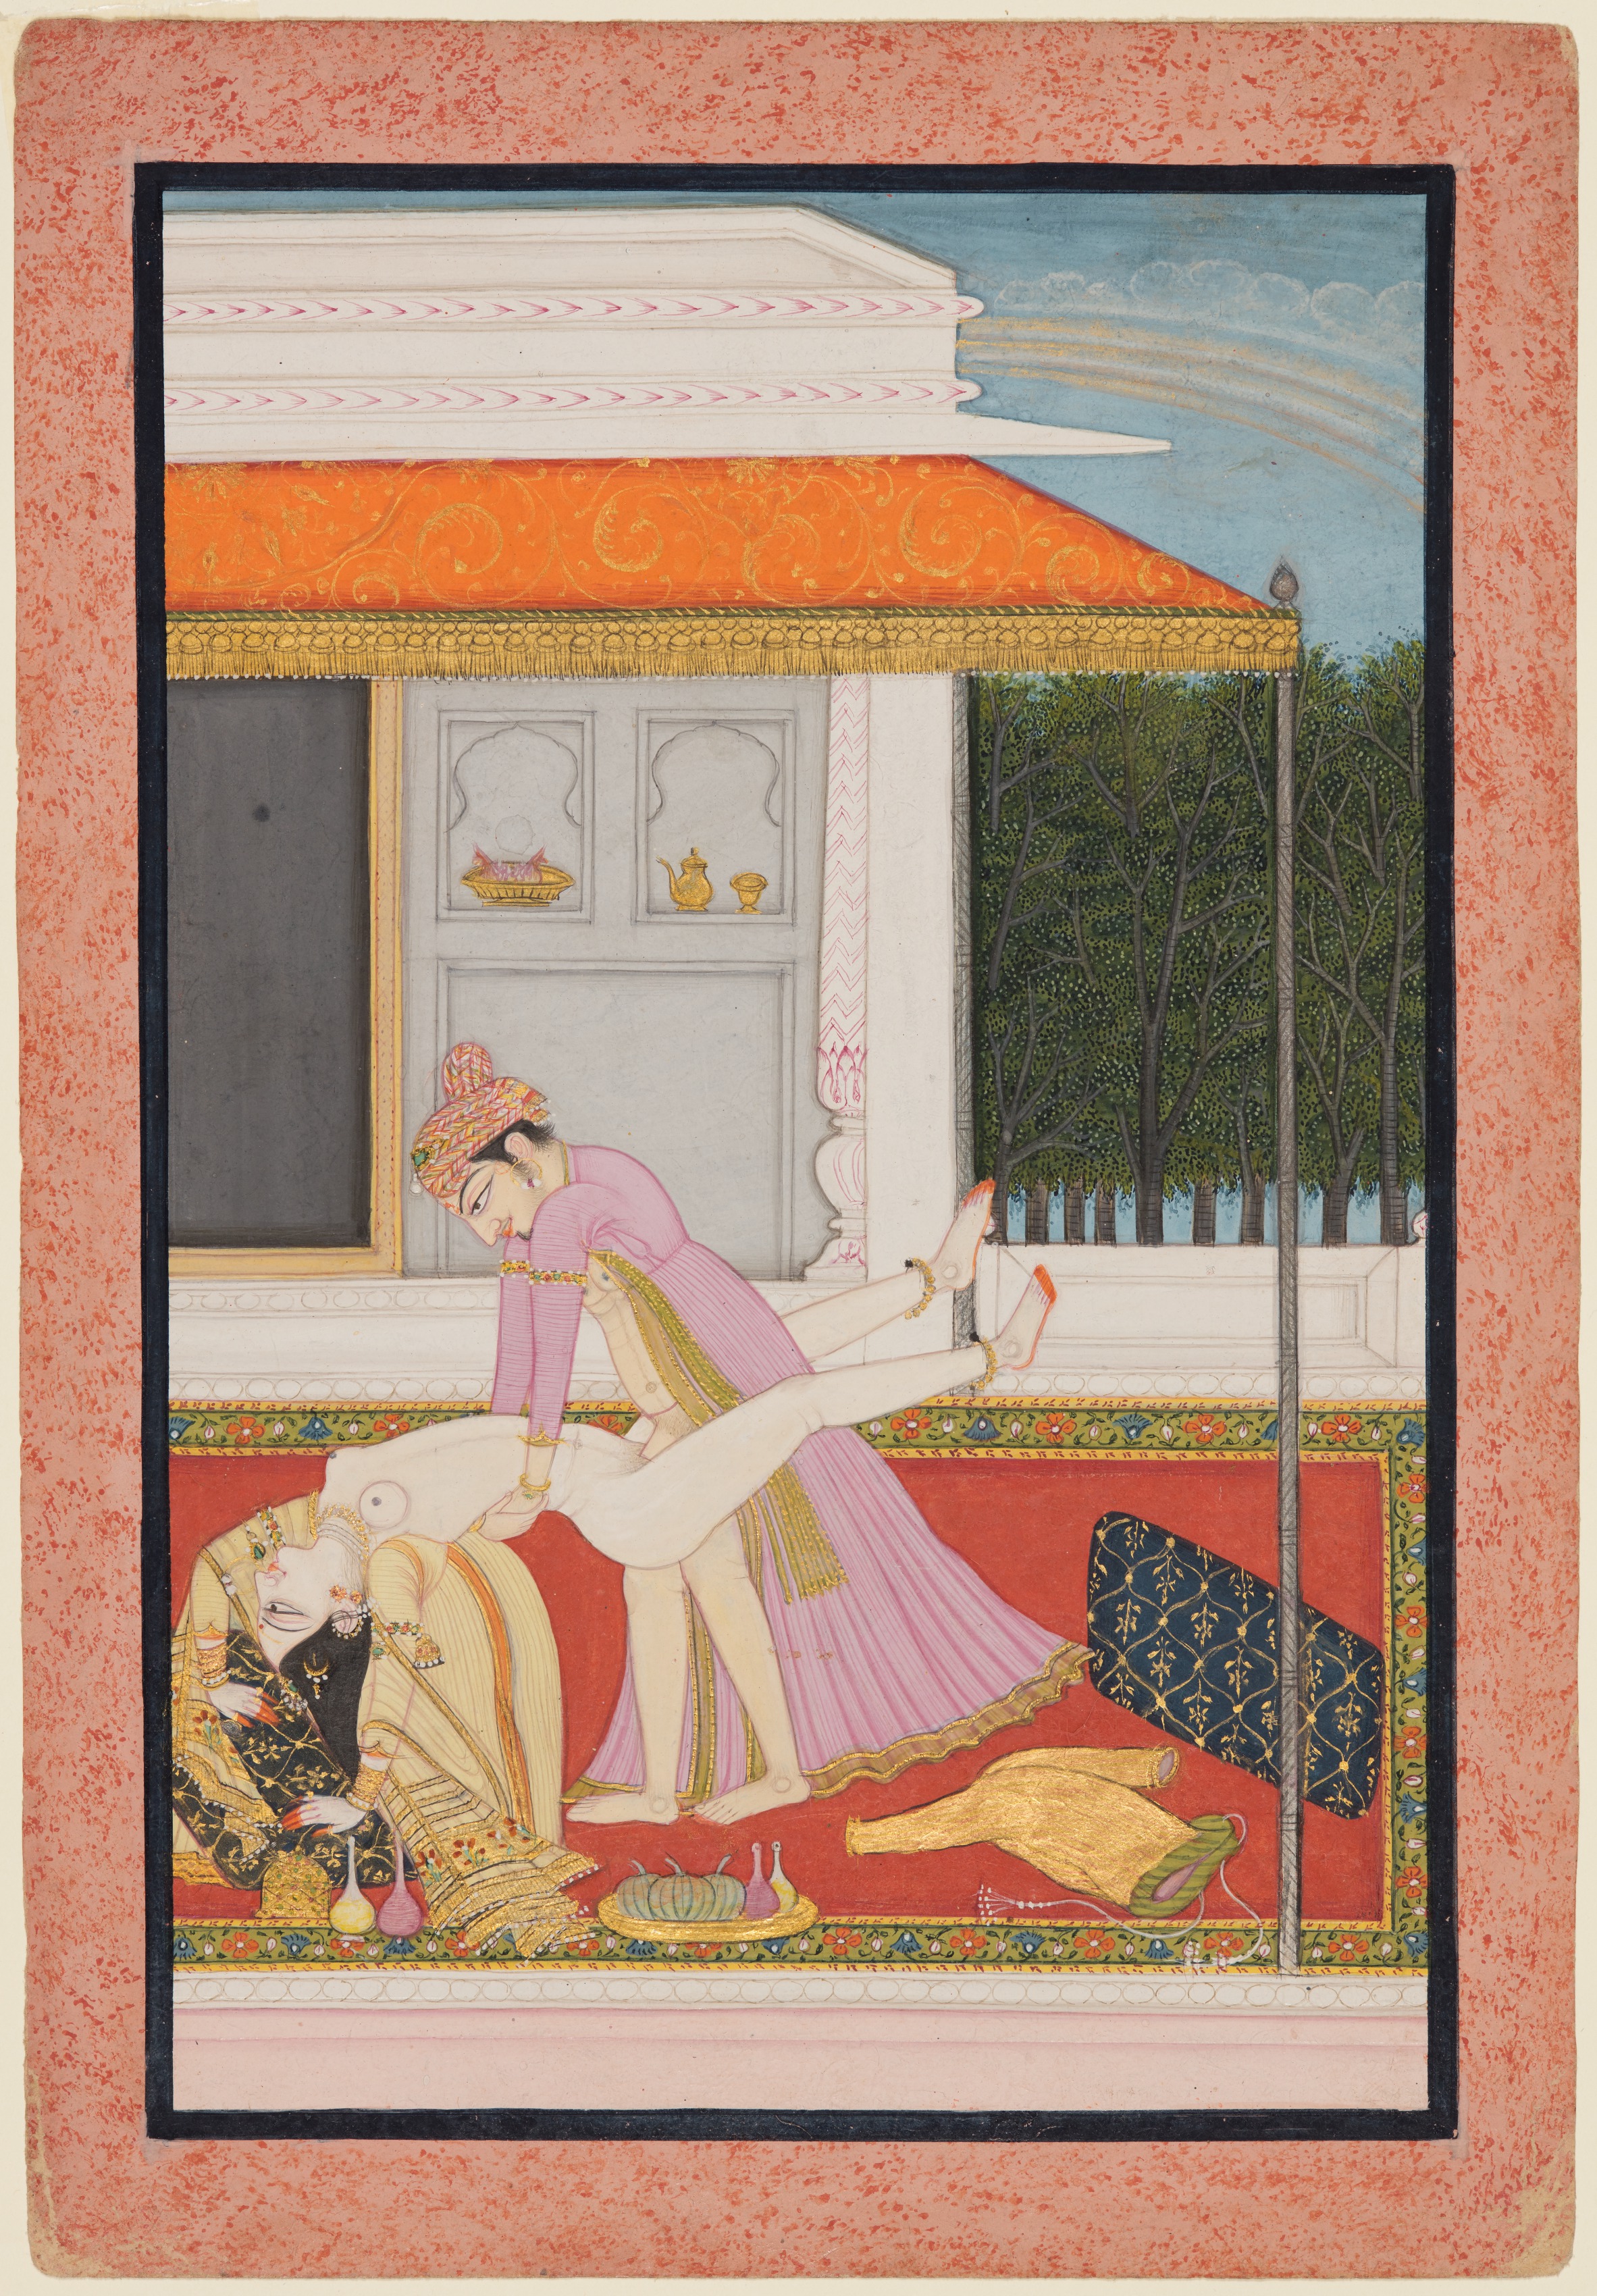 An Amorous Couple, Probably Raja Mahendra Pal of Basohli (r. 1806–13) with a Favorite Queen